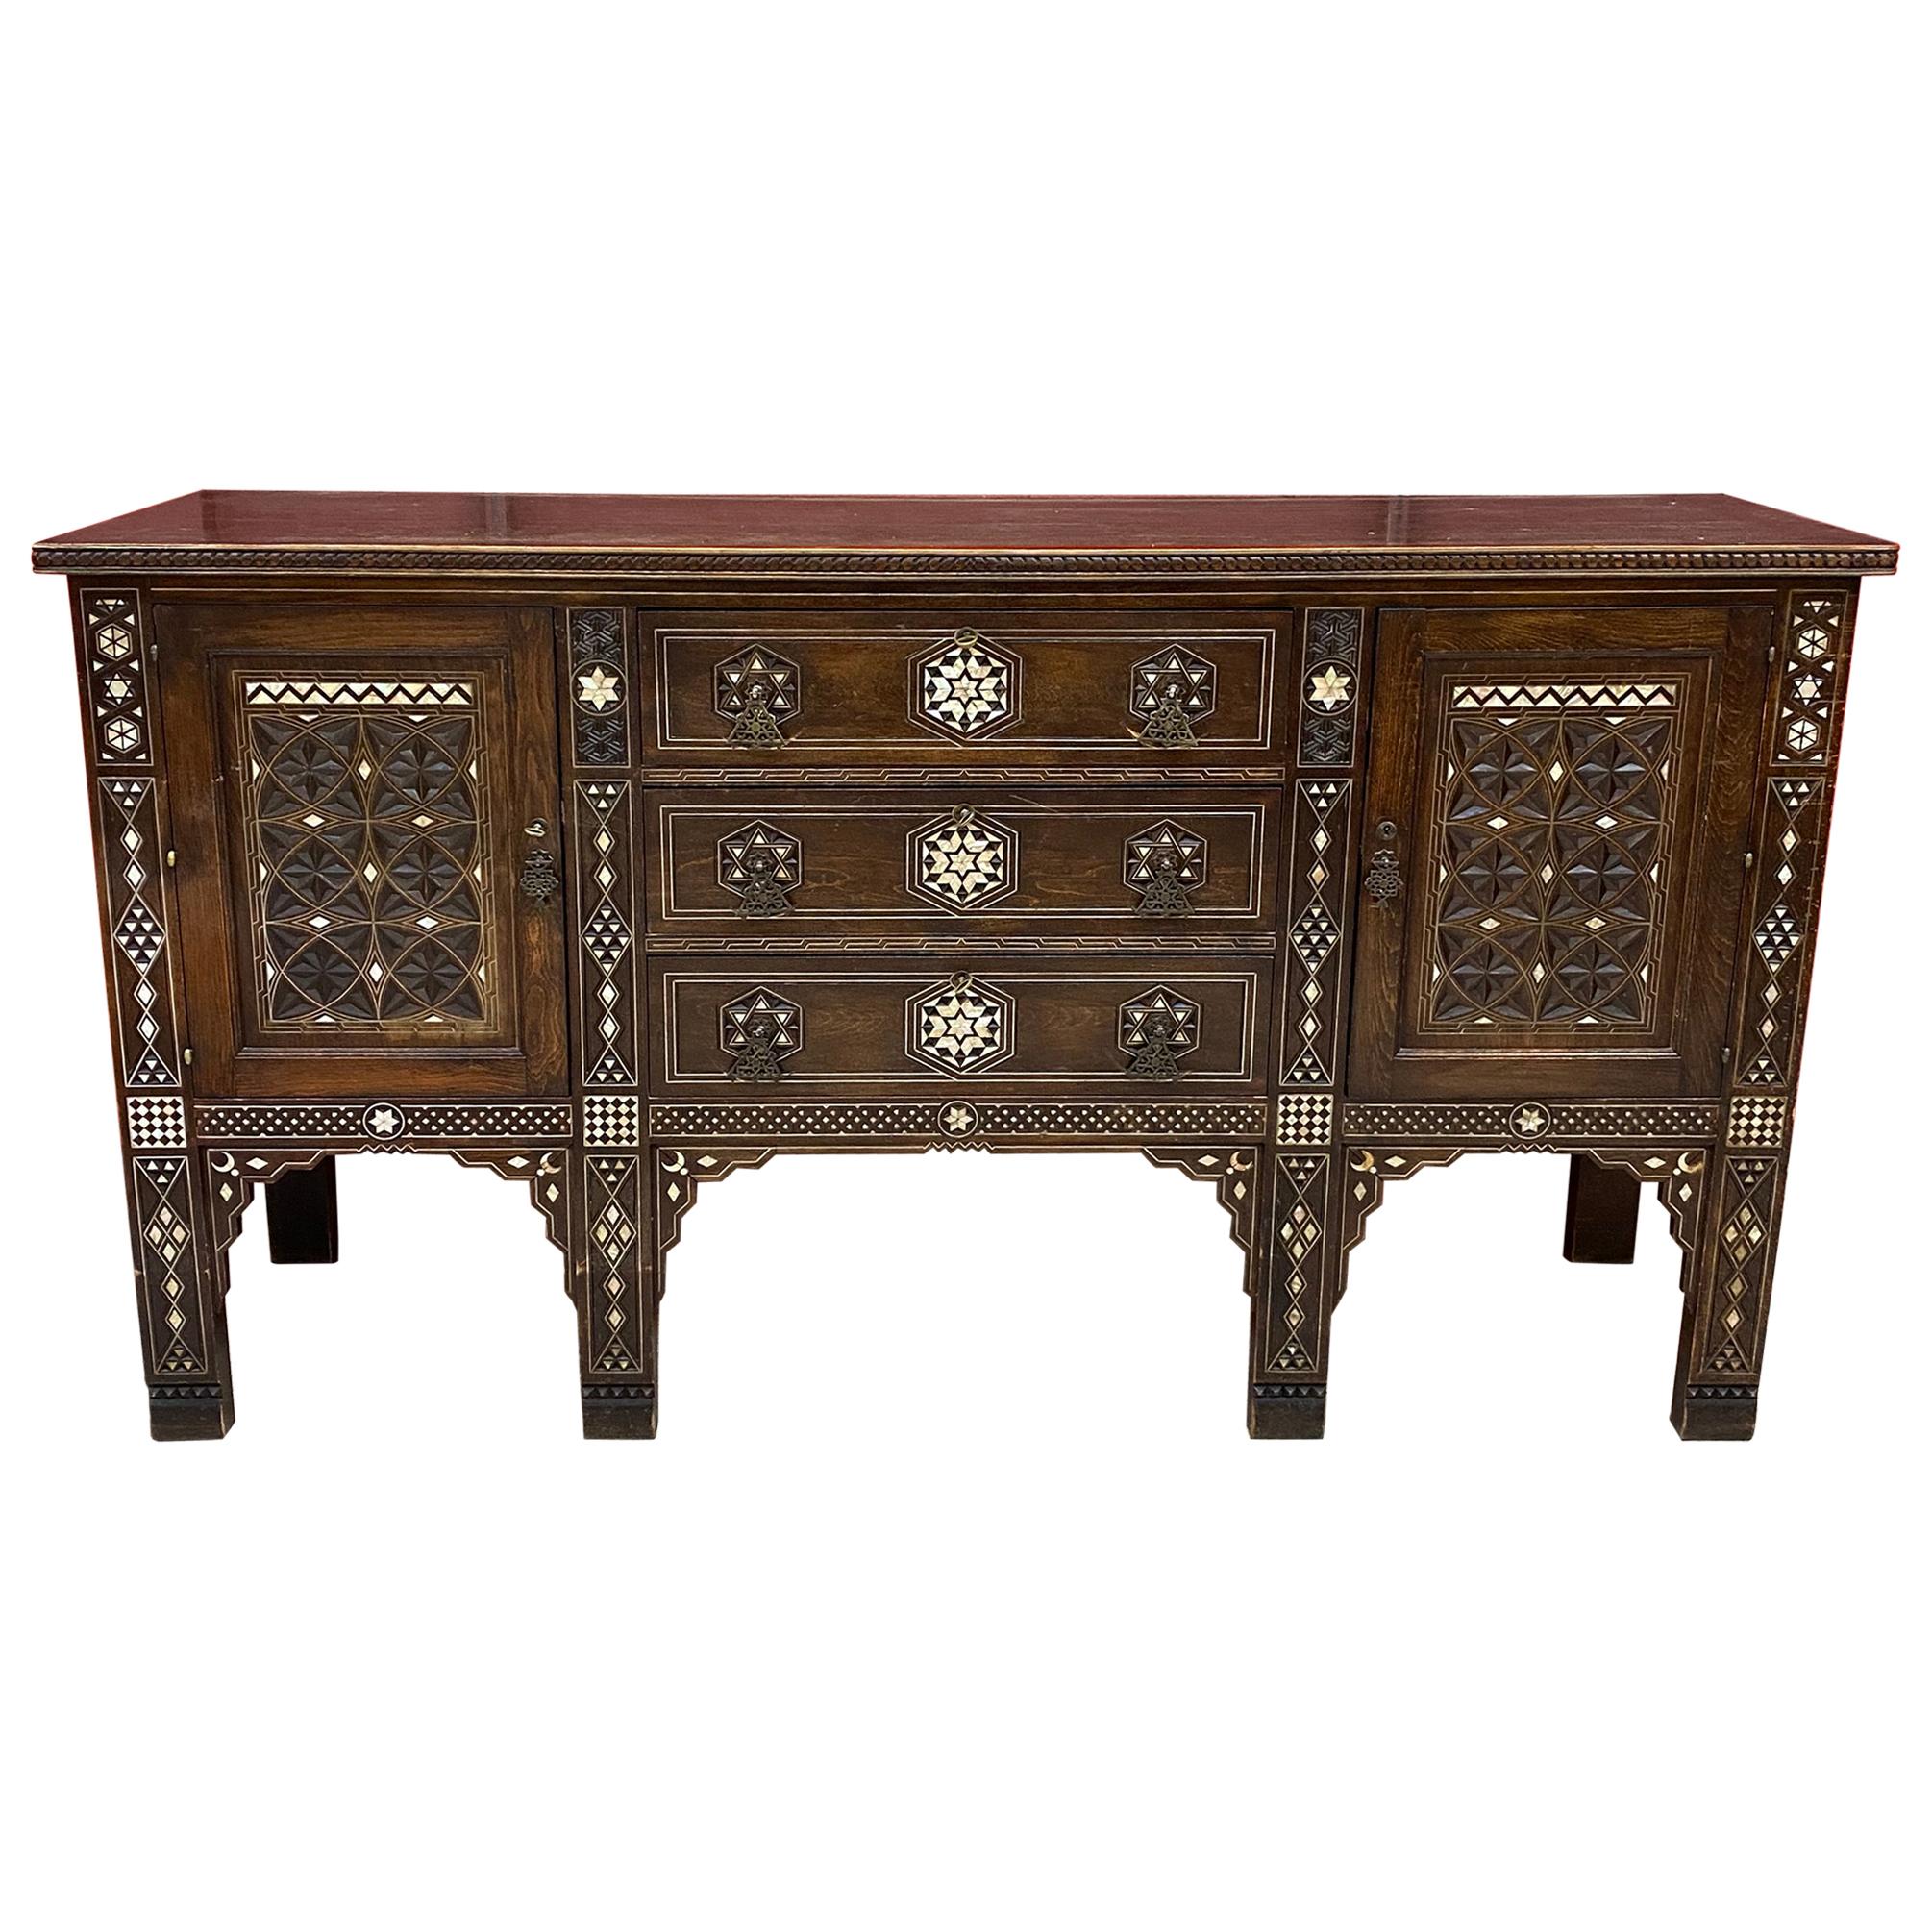 Large Oriental-Style Sideboard in carved Wood, with Mother-of-Pearl Inlay, 1880